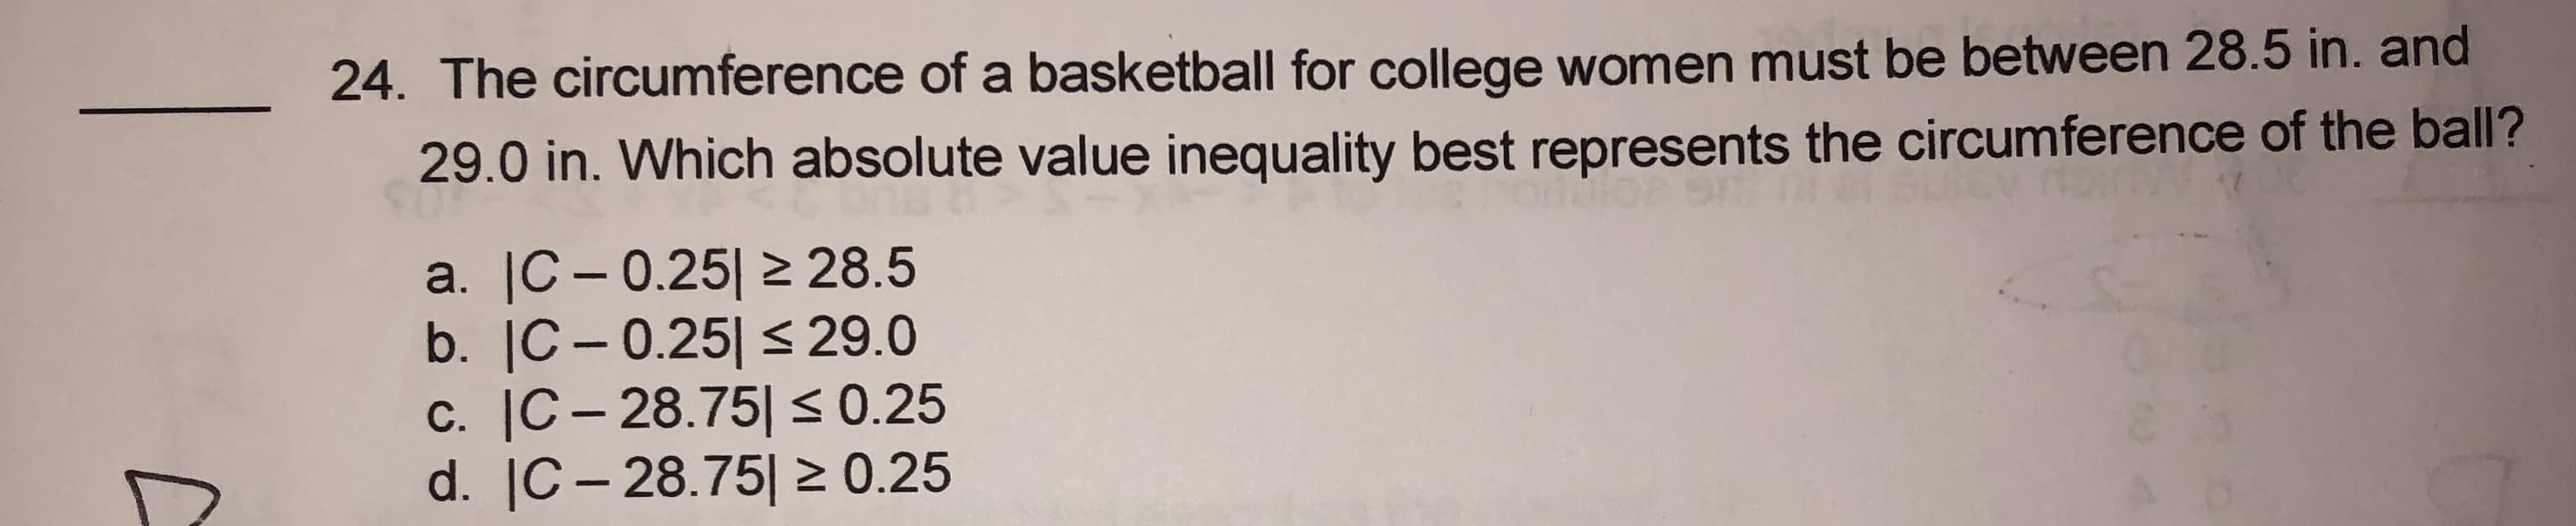 24. The circumference of a basketball for college women must be between 28.5 in. and
29.0 in. Which absolute value inequality best represents the circumference of the ball?
a. |C – 0.25| 2 28.5
b. |C- 0.25| <29.0
c. |C- 28.75|< 0.25
d. |C– 28.75| 2 0.25
